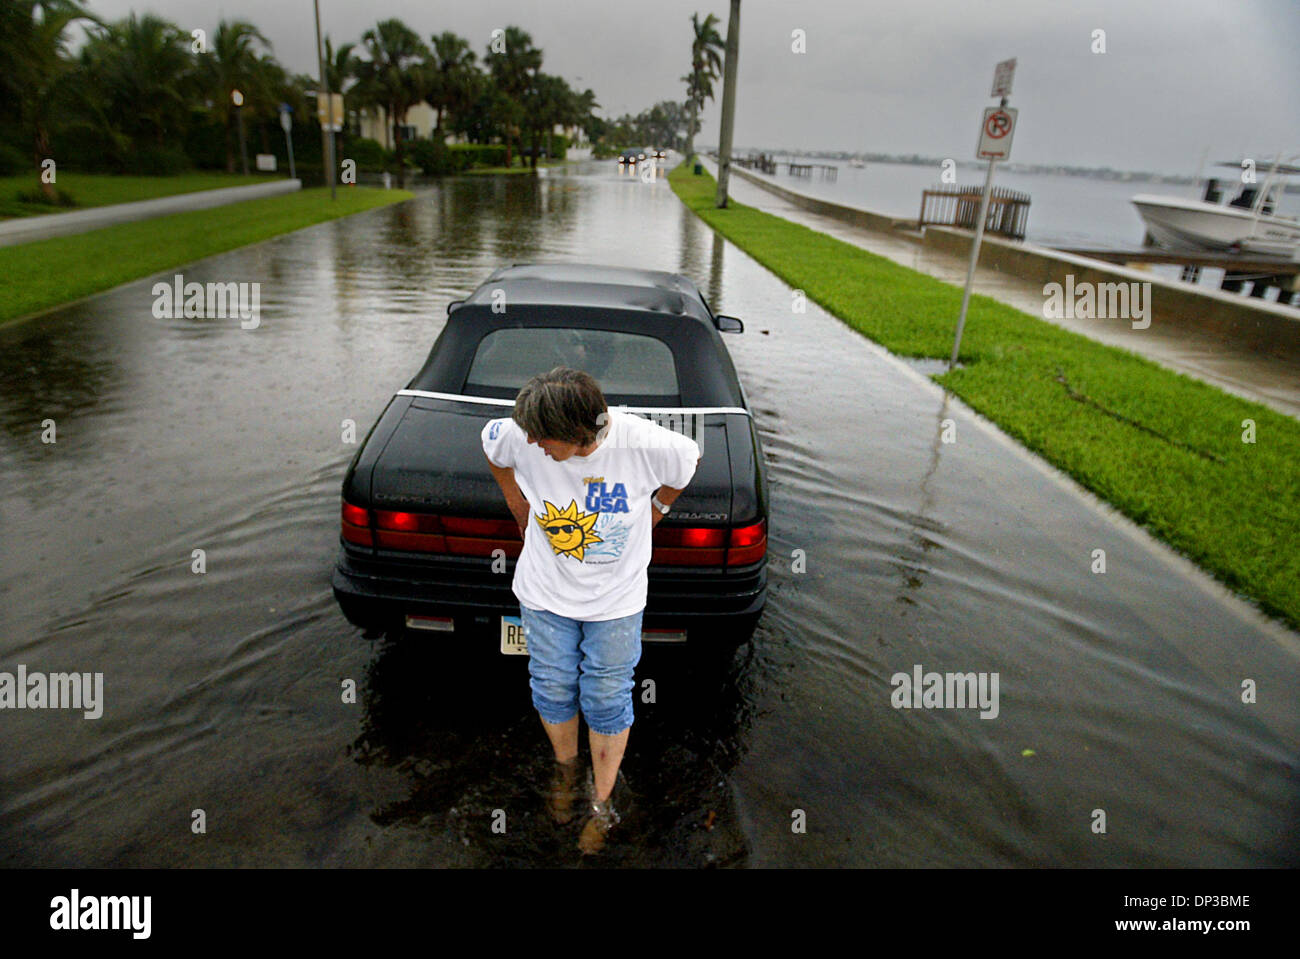 Jun 27, 2006; West Palm Beach, FL, USA; Following yesterday's afternoon downpours, Cathy Riegle of Hobe Sound struggles to push her friend Kaye Cooke in her Chrysler Lebaron down flooded Flagler Dr. just north of Southern Blvd.  Riegle had traveled to an appointment with Cooke and the two women were headed to find themselves some dinner in an area restaurant when Cooke's stalled.   Stock Photo